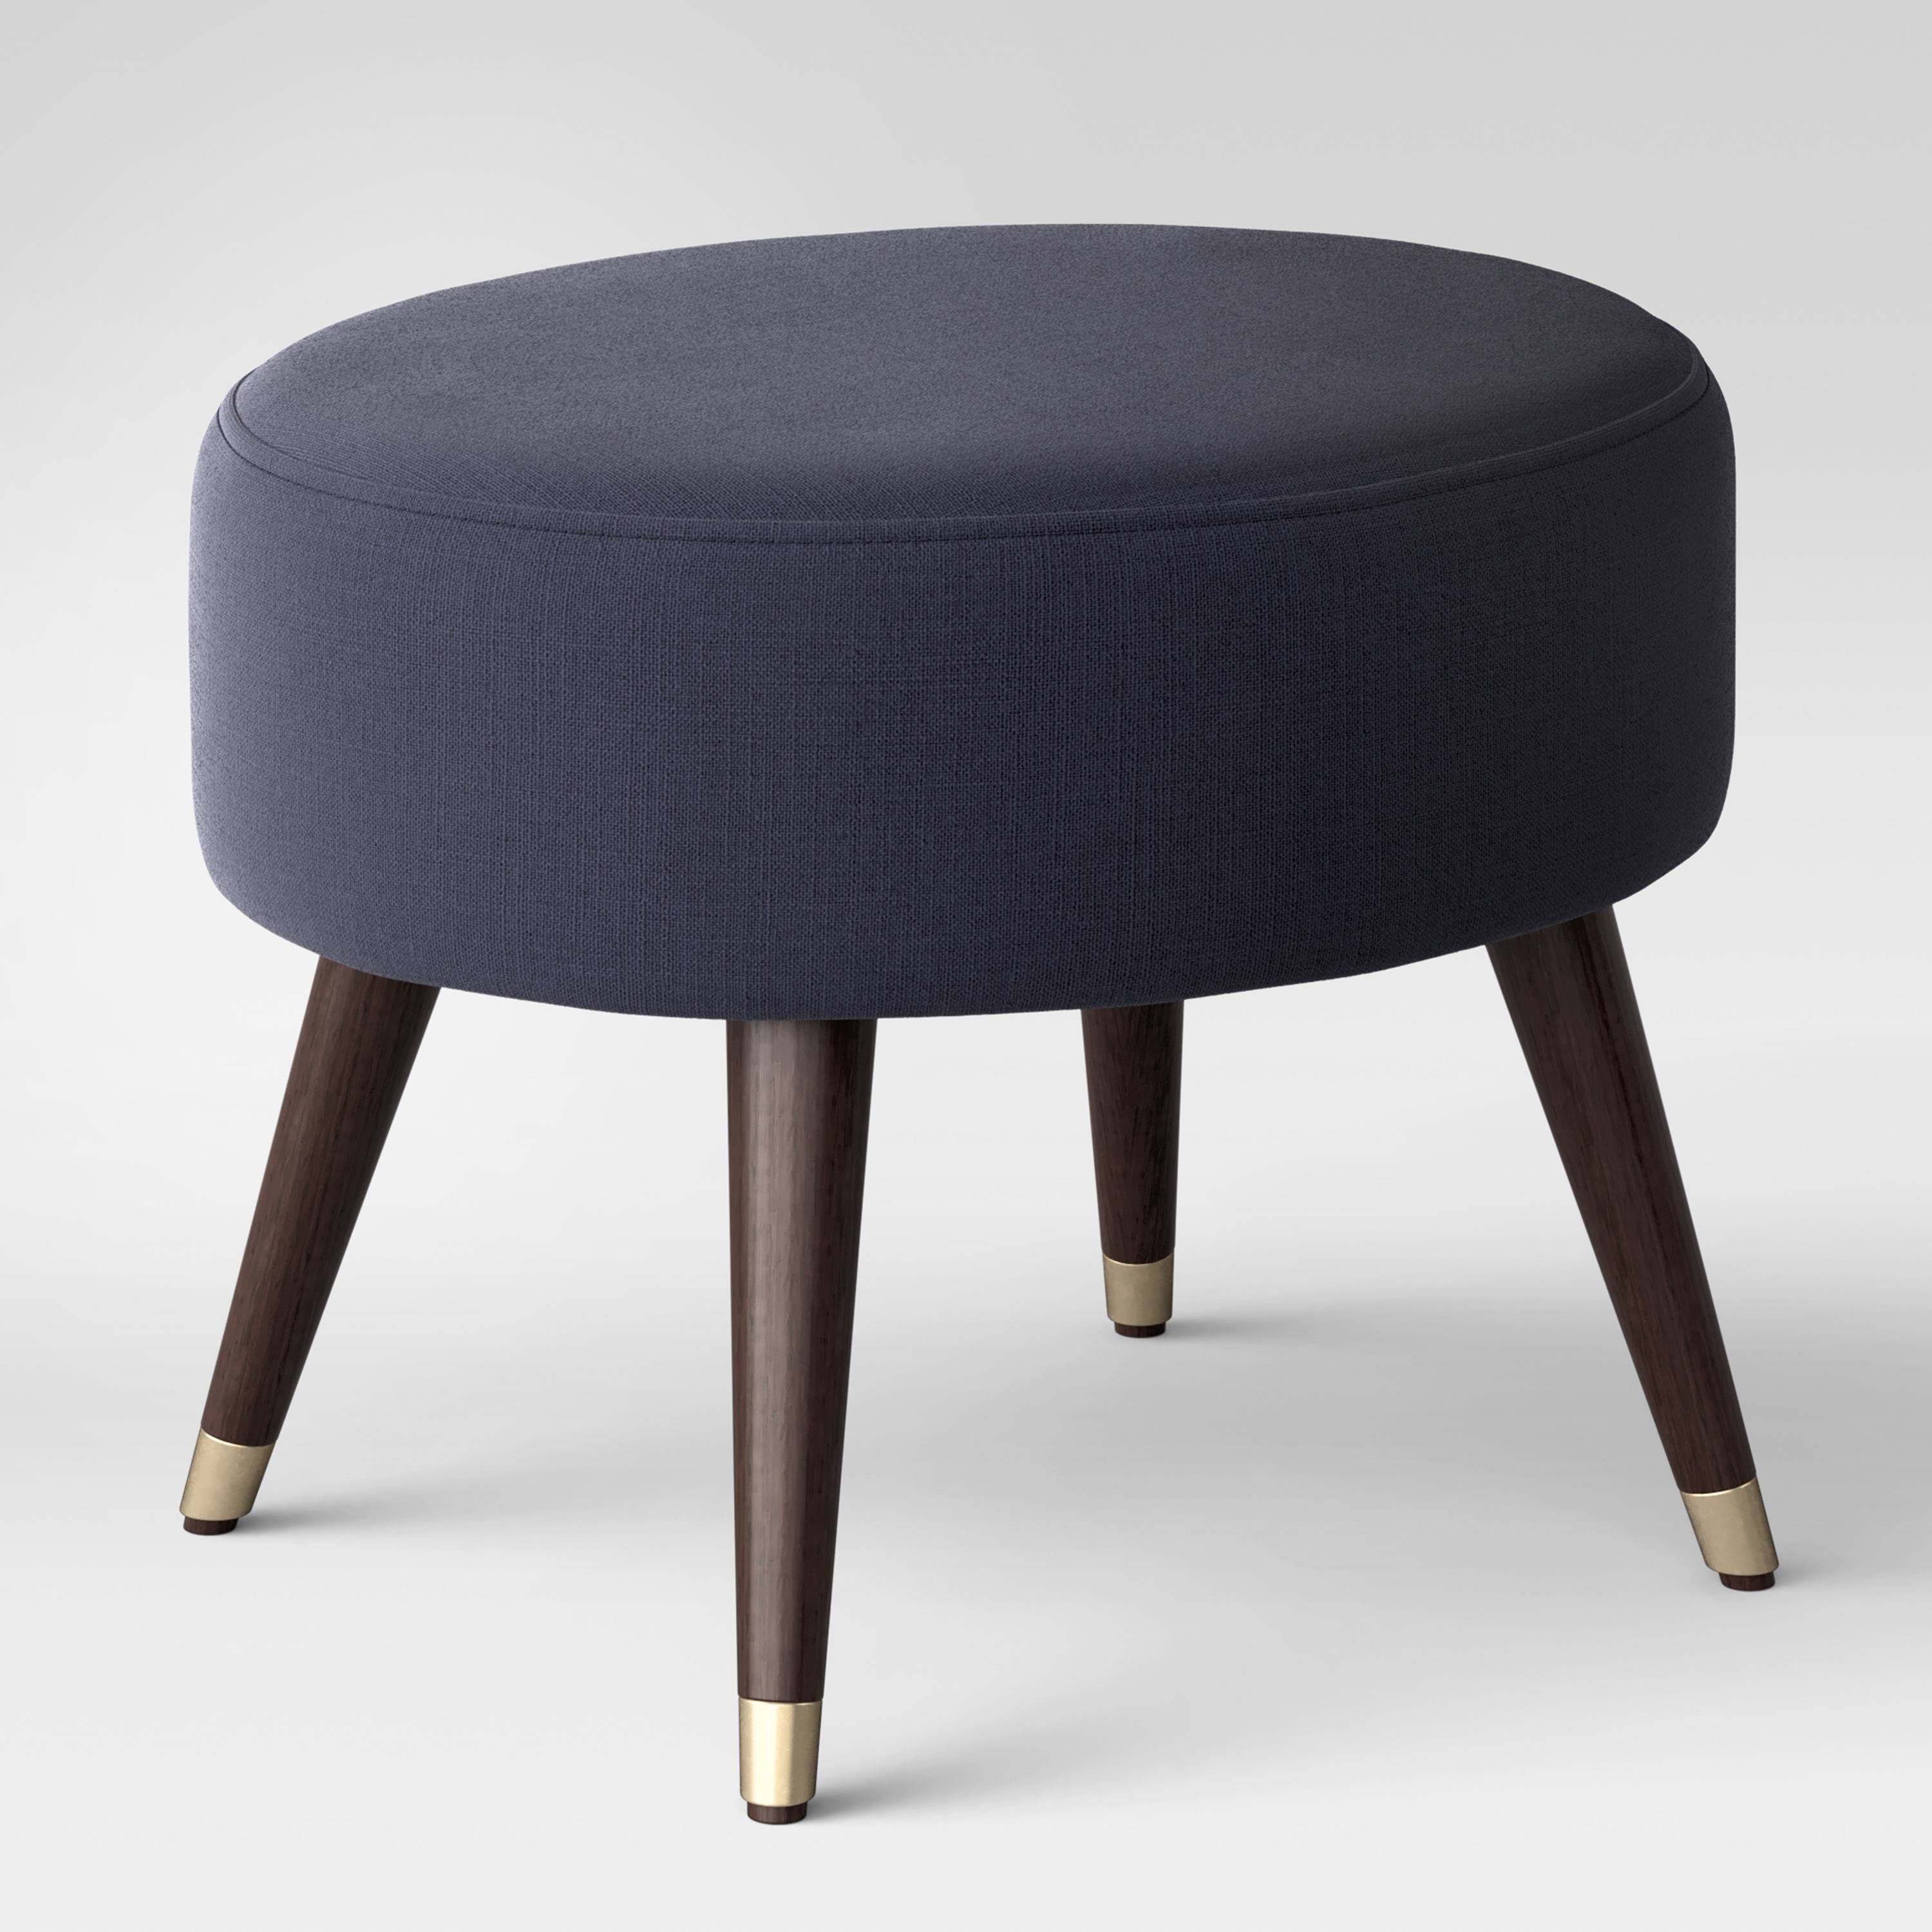 target new home line looks much more expensive than actually margate accent table comfy armchair high dining room sets furniture side small leather modern bar drum set throne